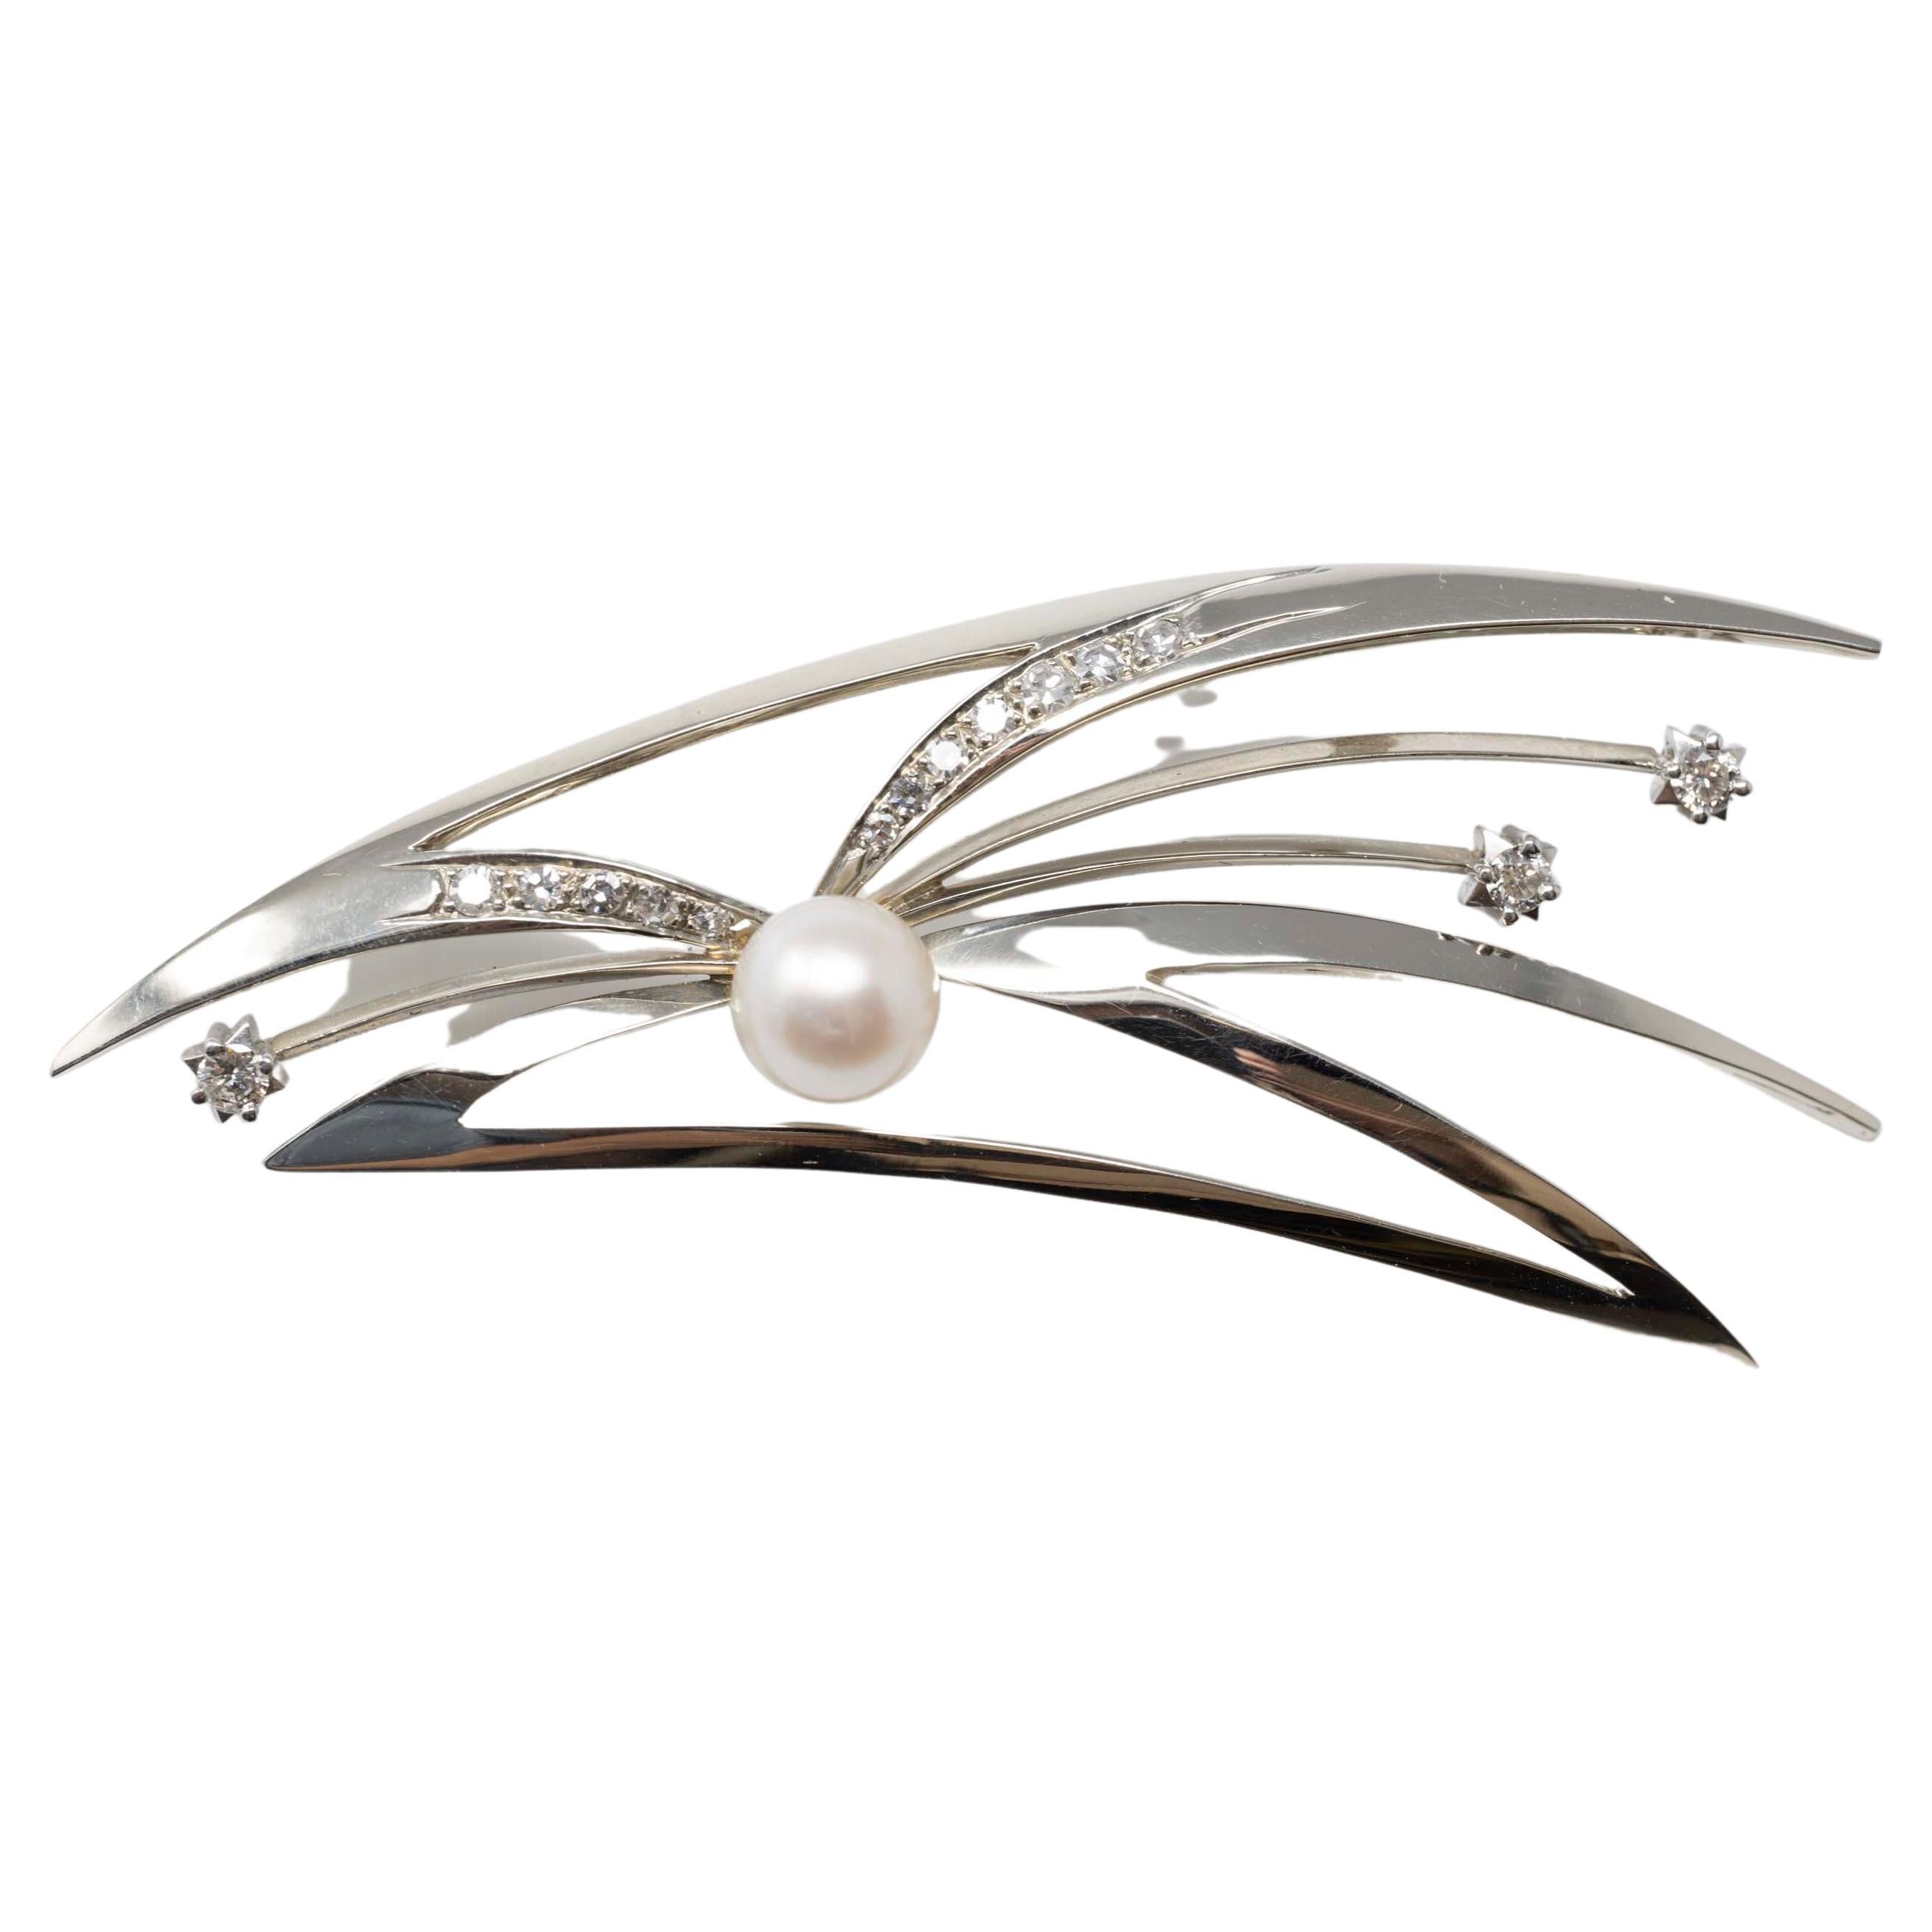 Georges Delrue 18k White Gold Brooch with Pearl and Diamonds